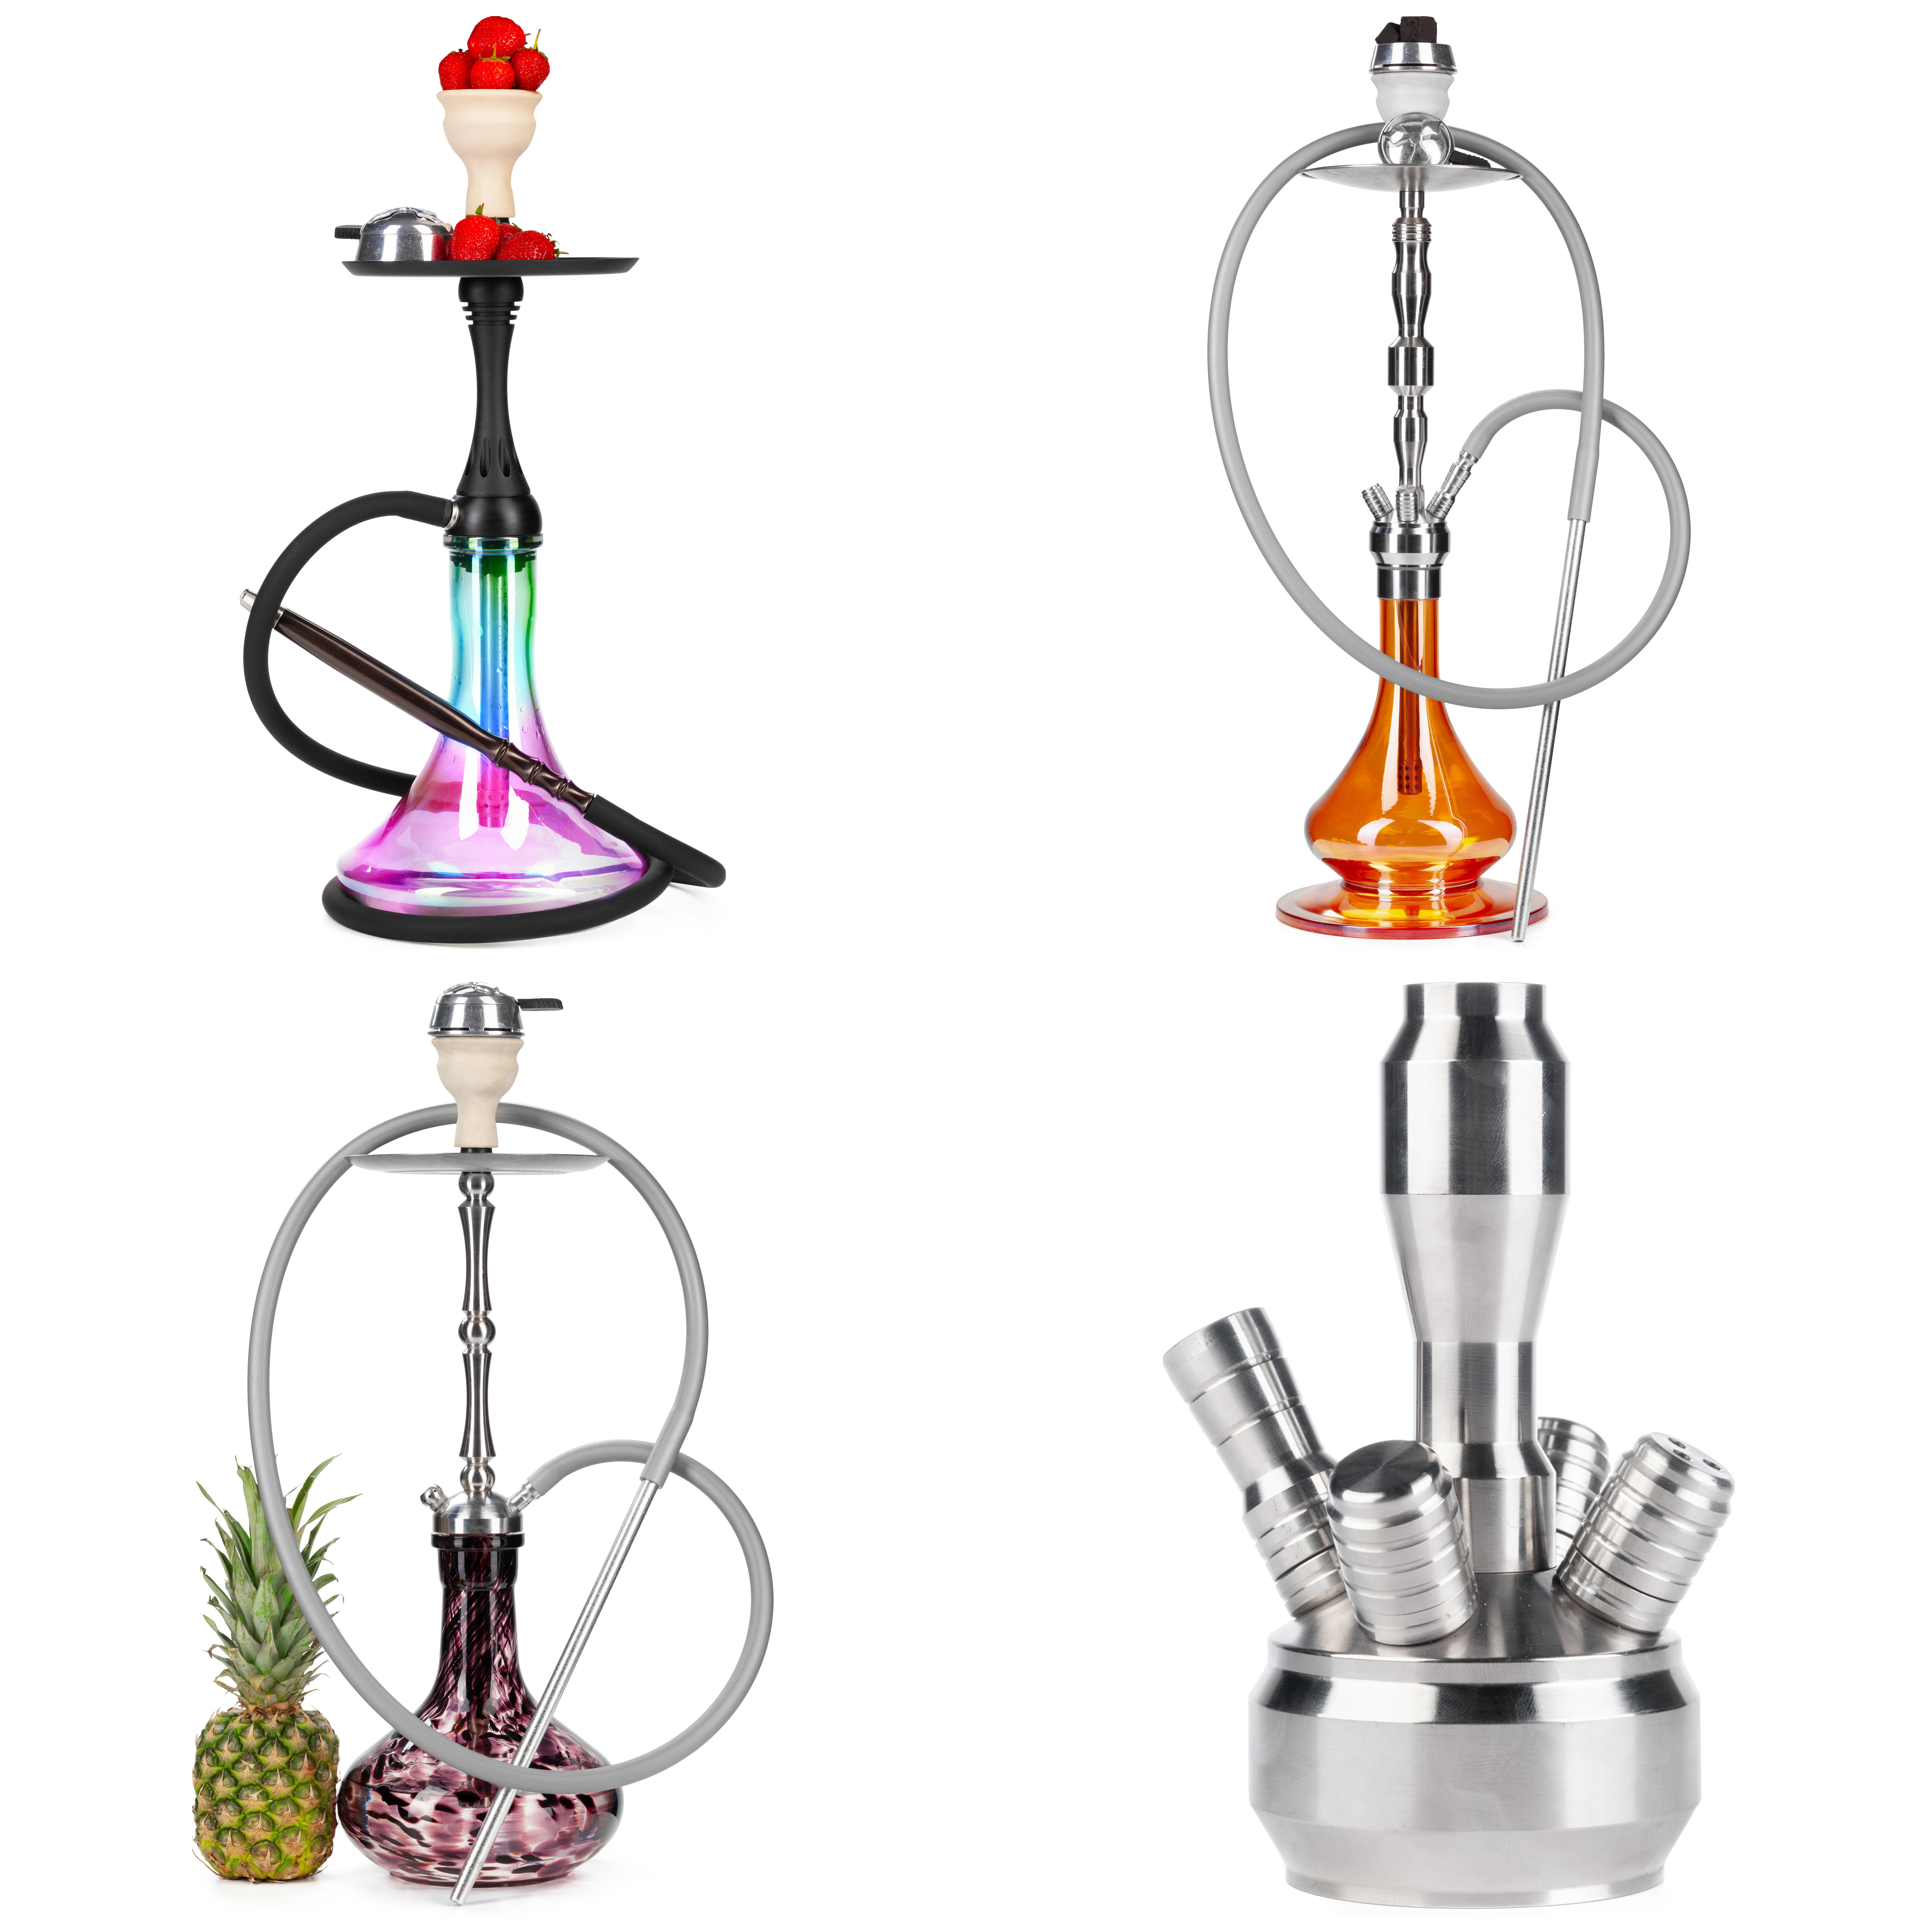 Collage of hookah isolated on a white background